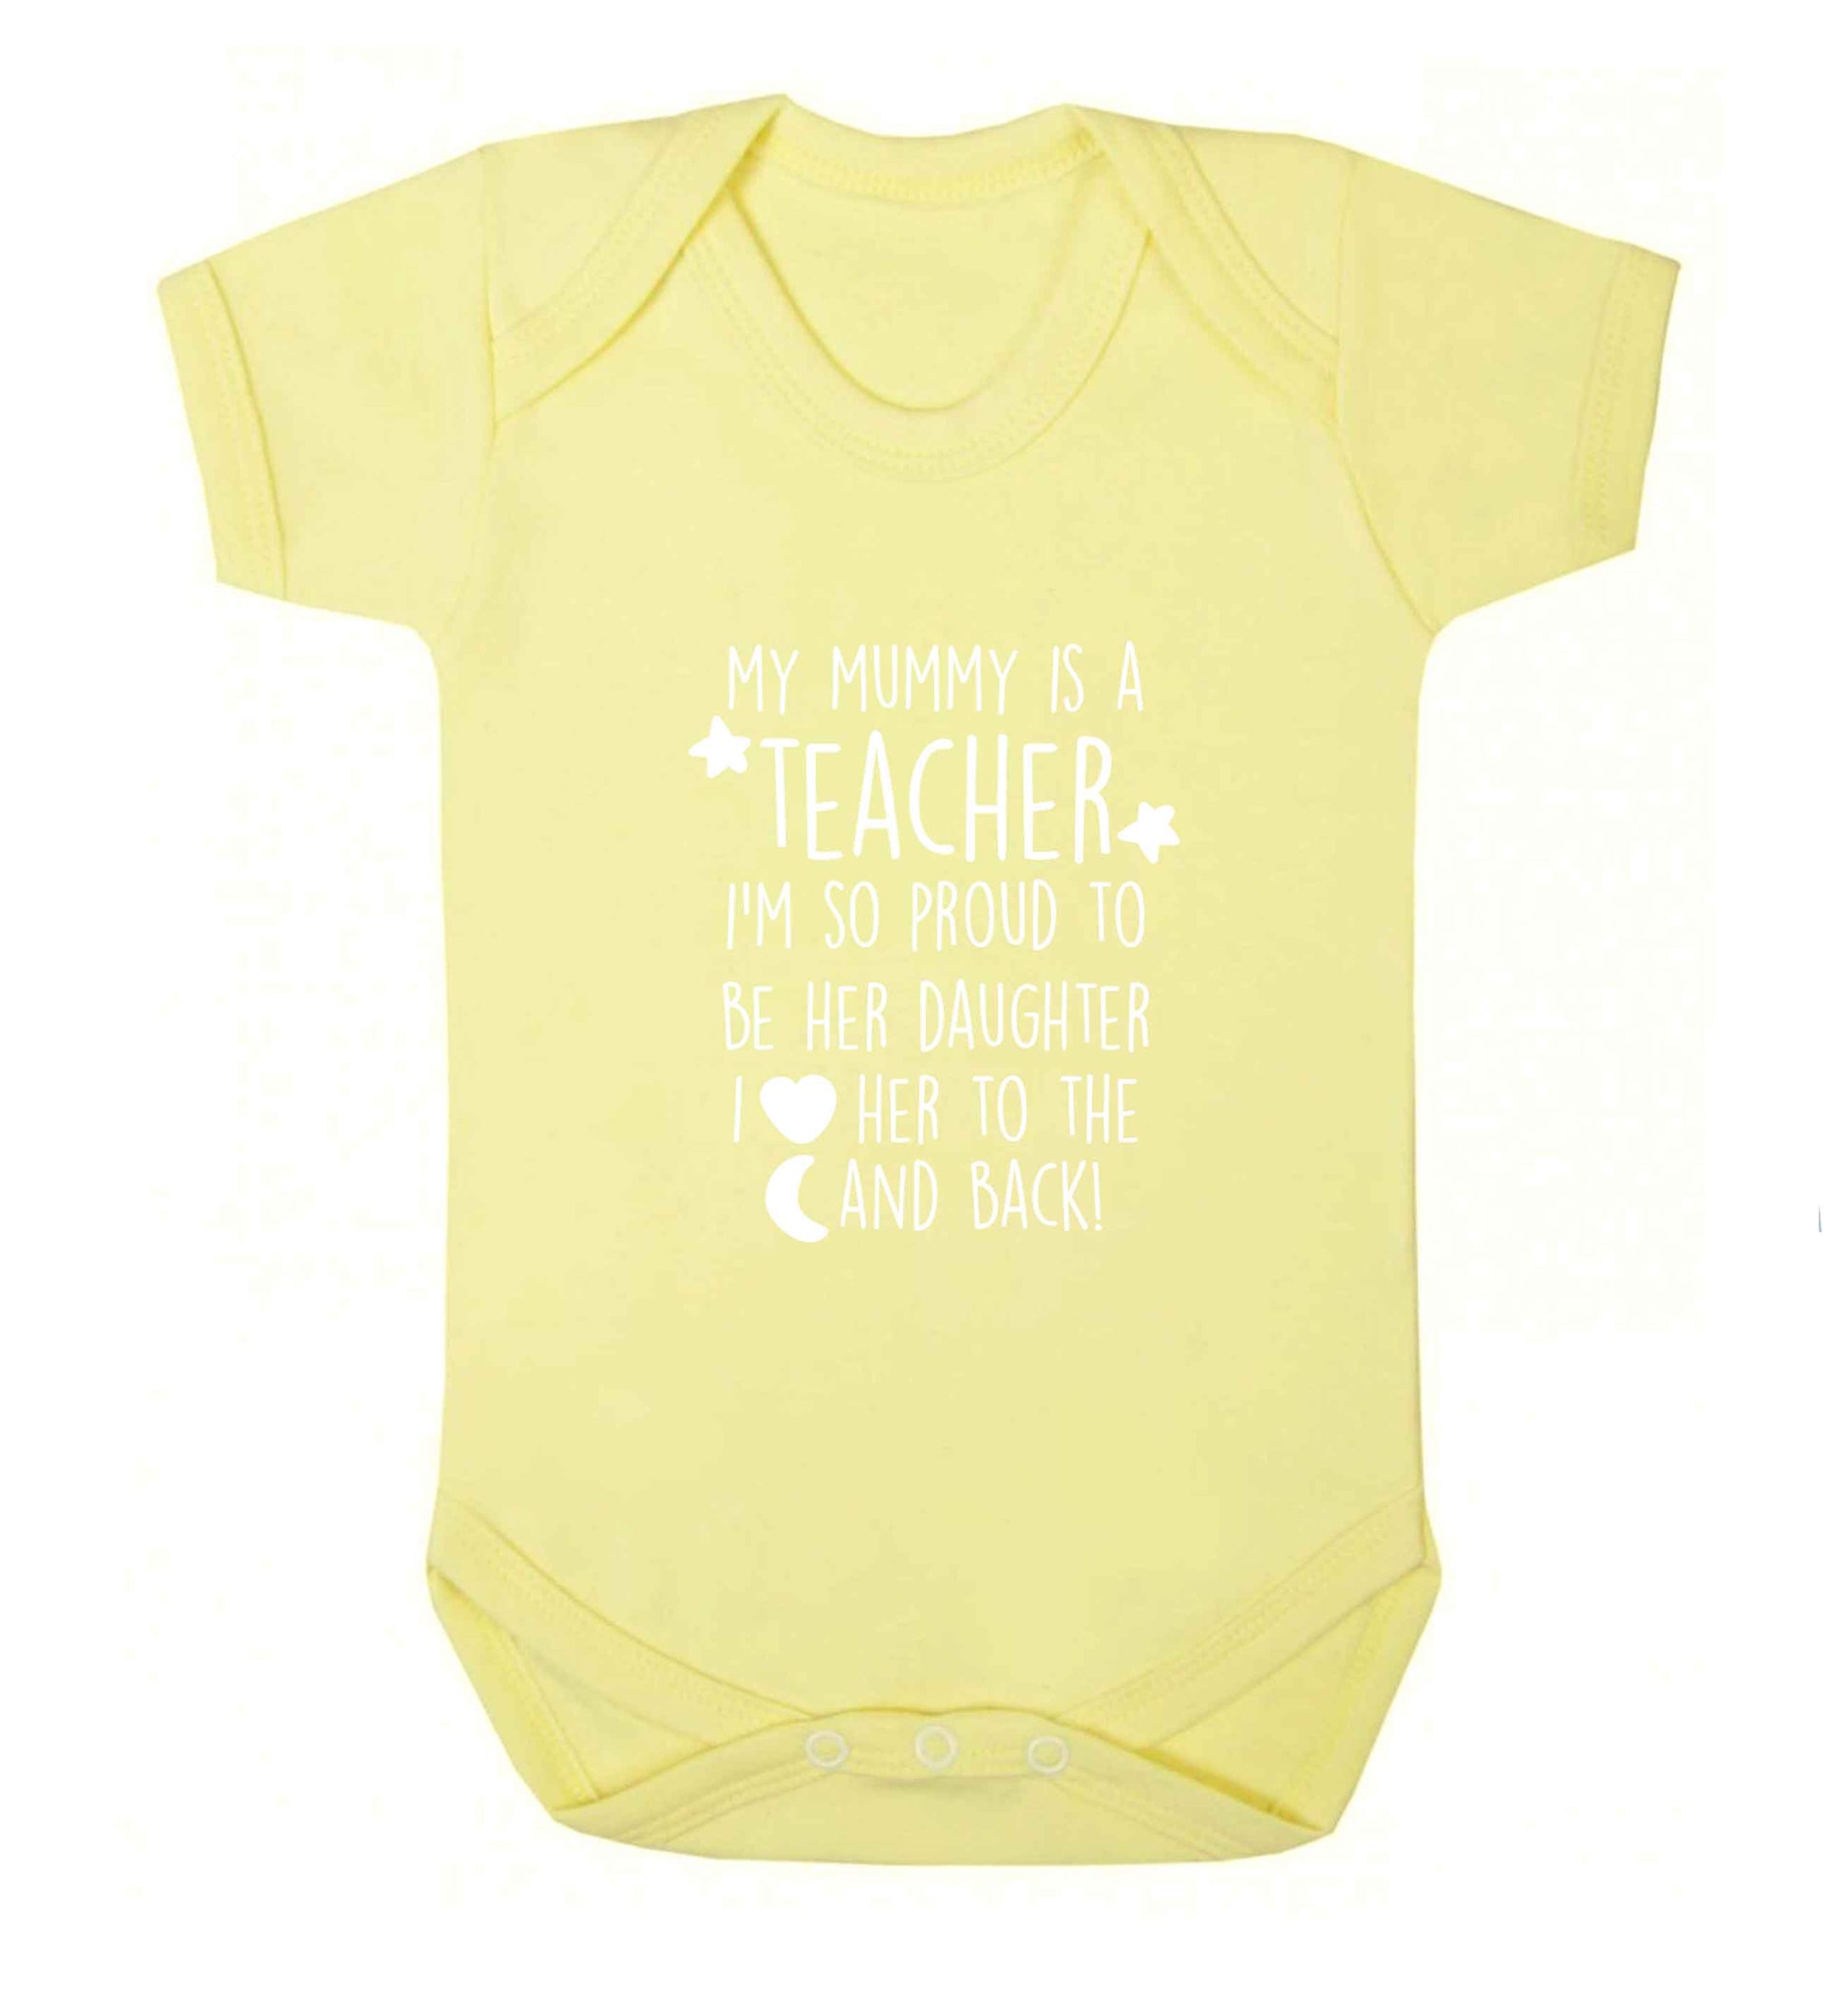 My mummy is a teacher I'm so proud to be her daughter I love her to the moon and back baby vest pale yellow 18-24 months